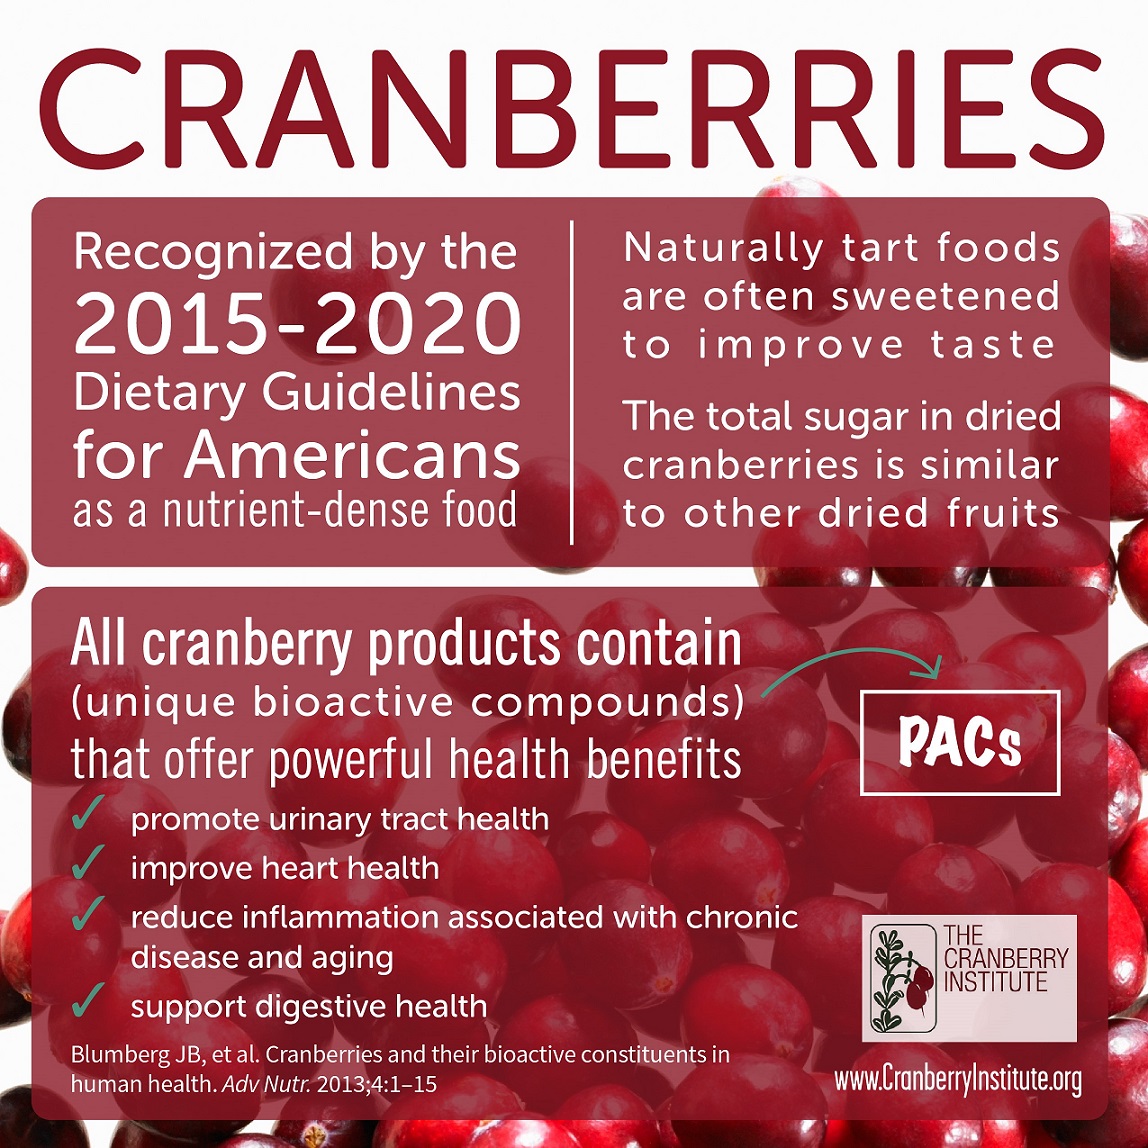 CranberriesGraphic-JPEG_small